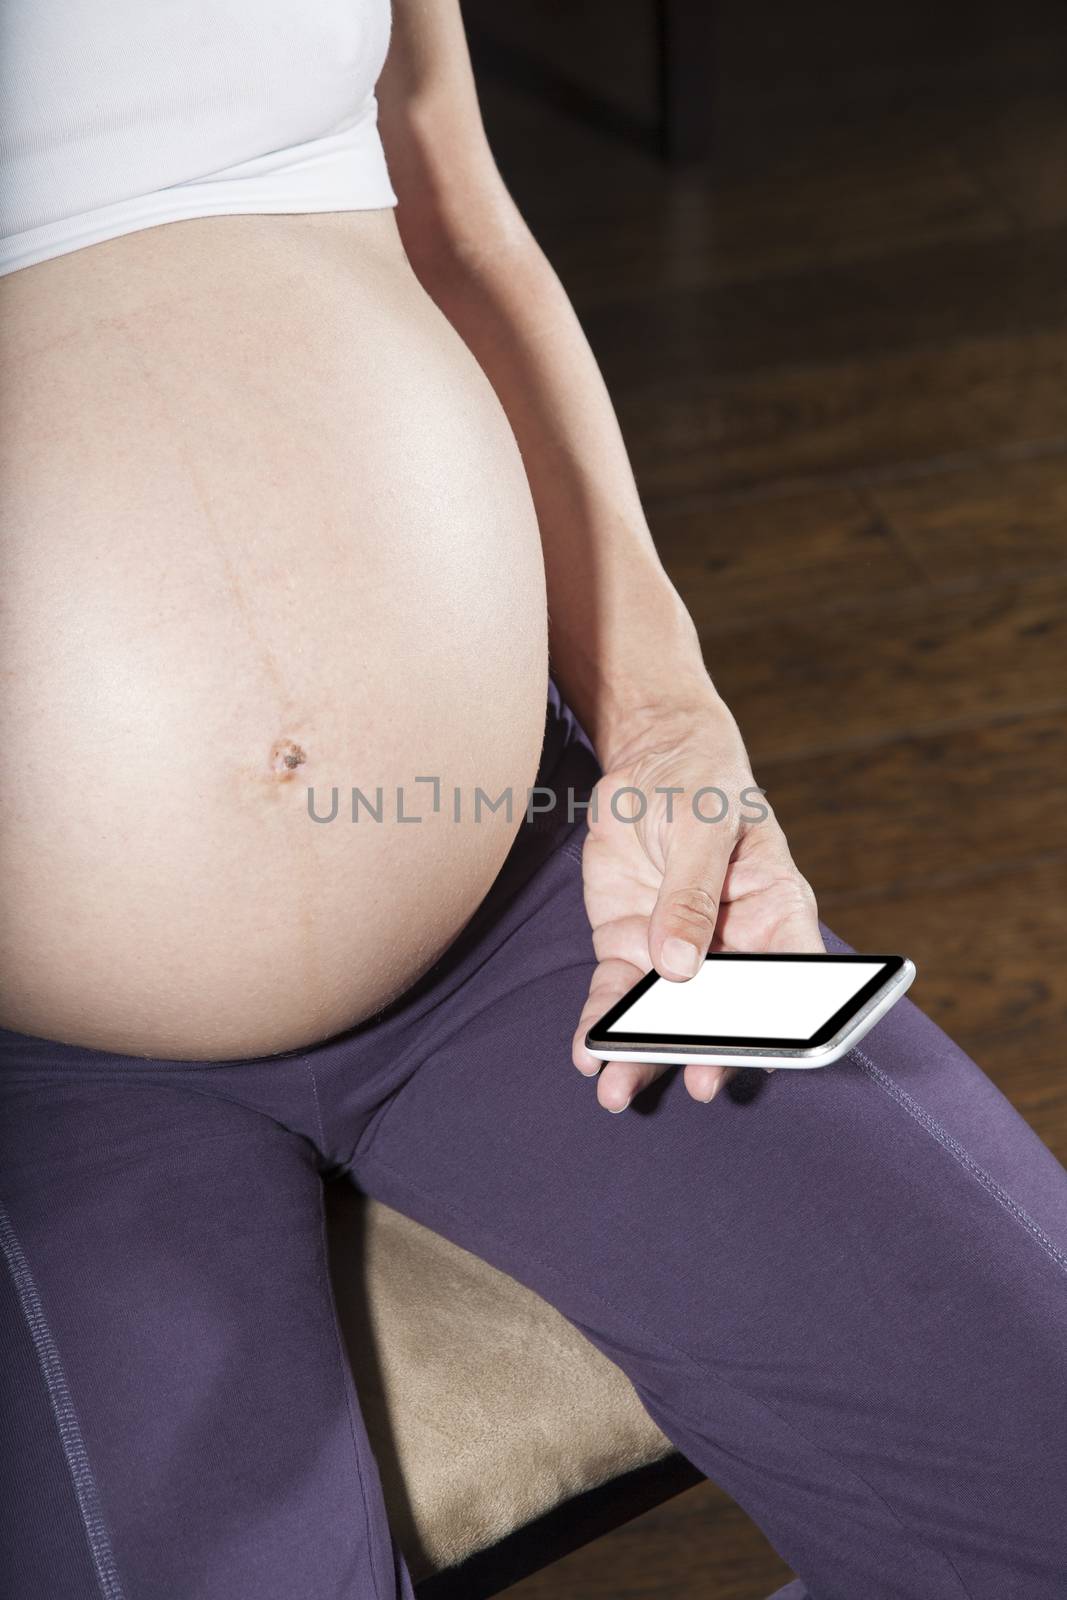 tummy and smartphone by quintanilla